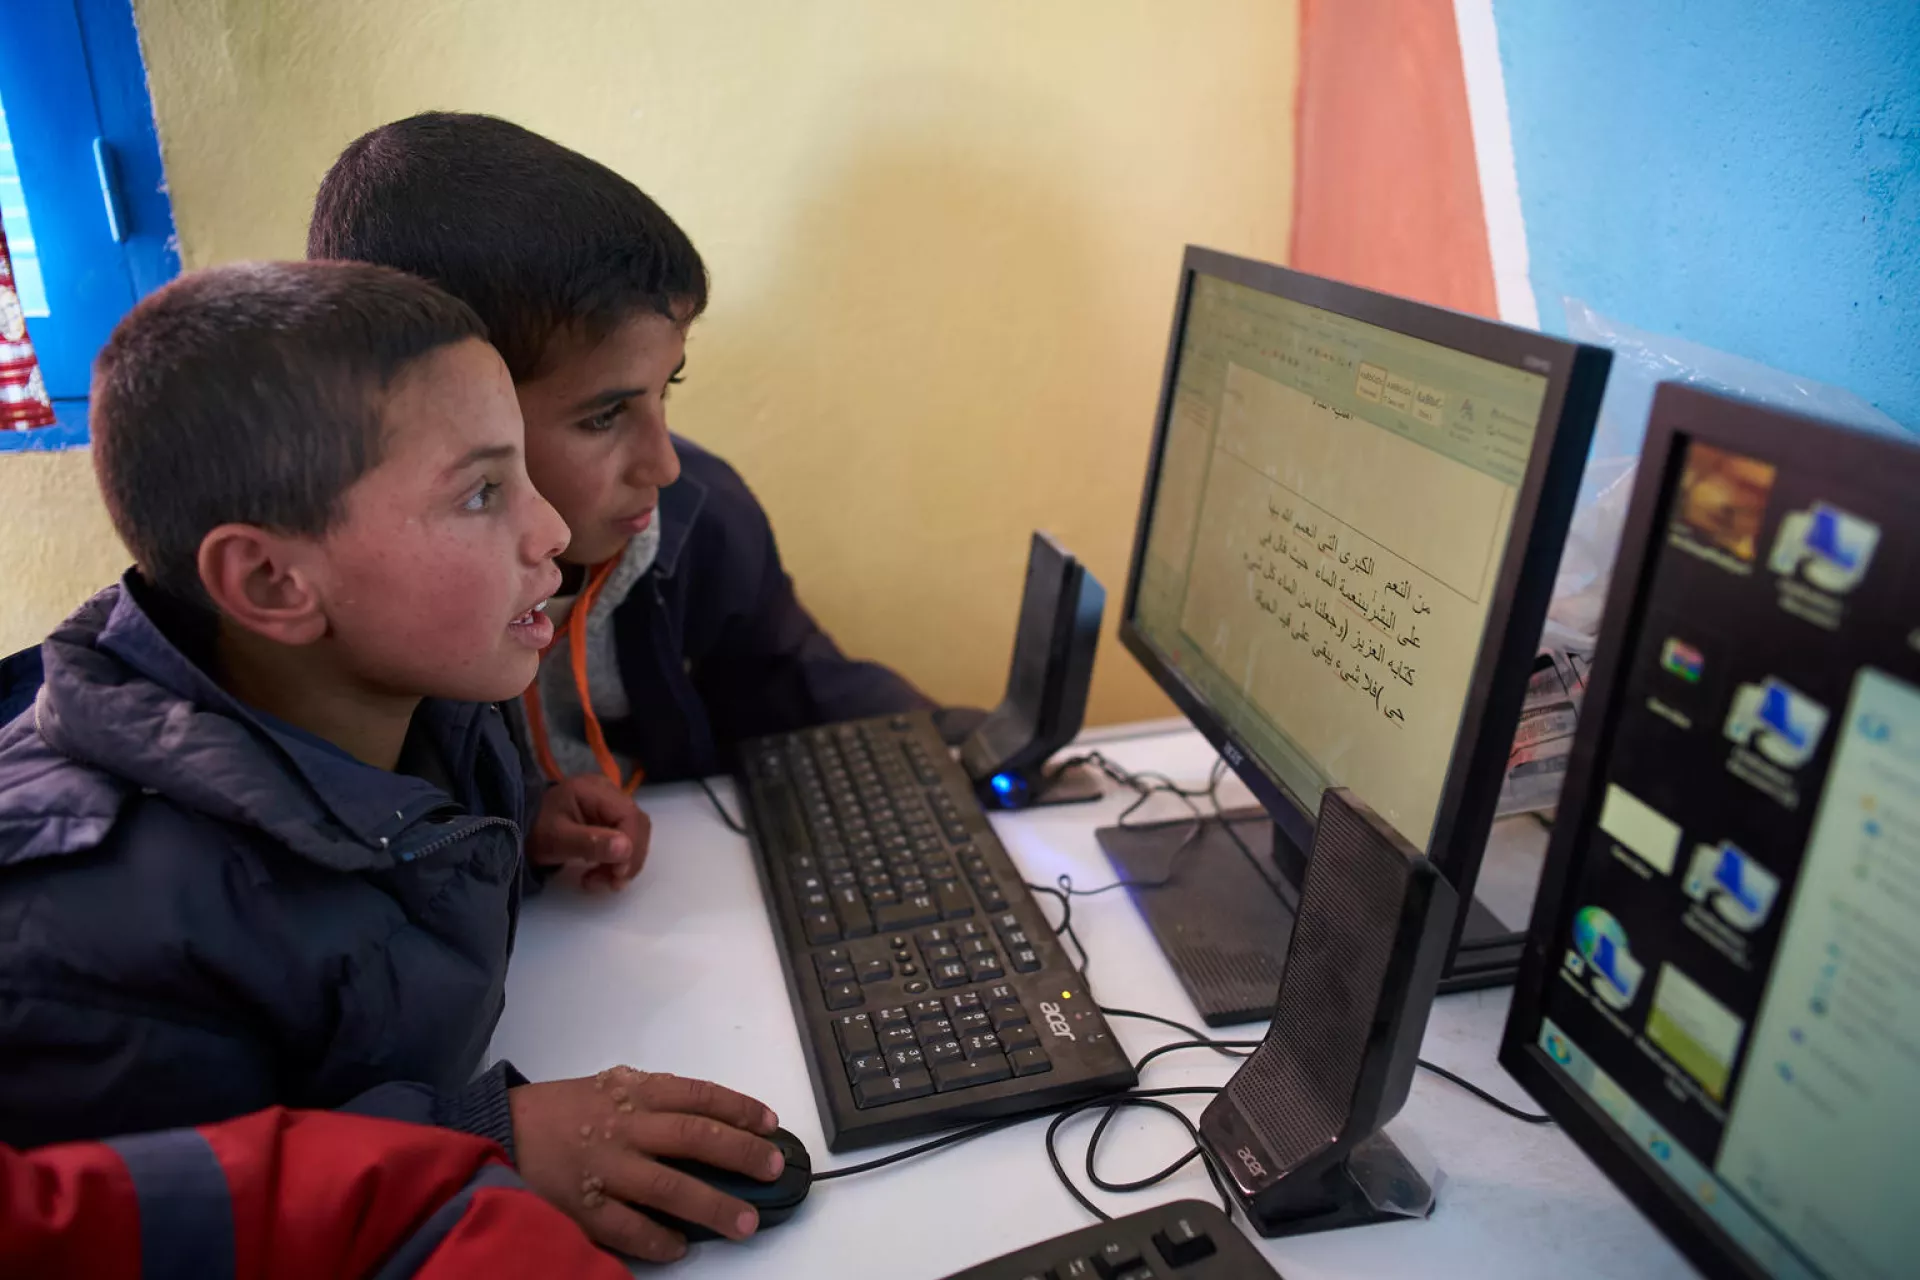 Children use computer in a library at Boufaroua Primary School on the outskirts of Sbeitla in Tunisia.